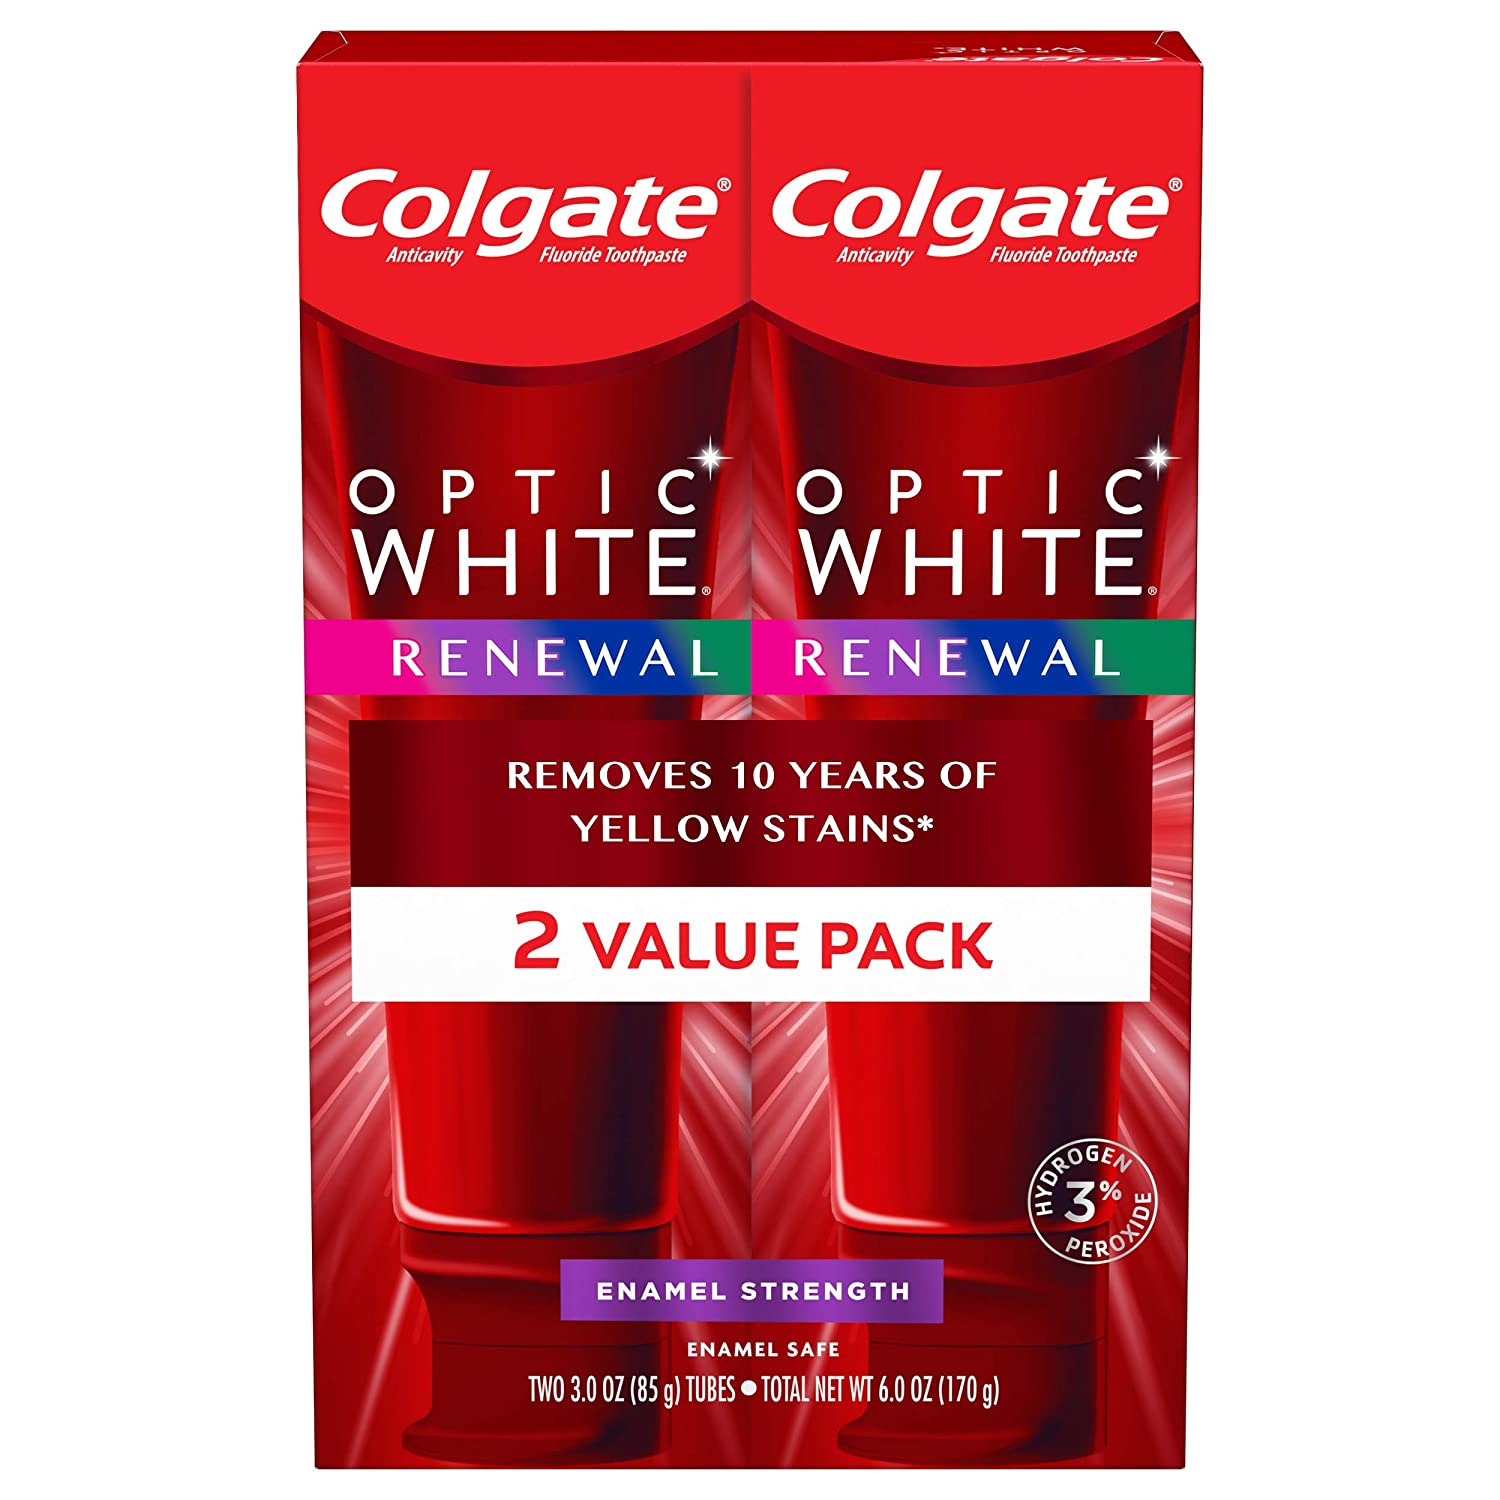 Optic White Renewal Teeth Whitening Toothpaste with Fluoride, 3% Hydrogen Peroxide, 3 oz (Pack of 2)